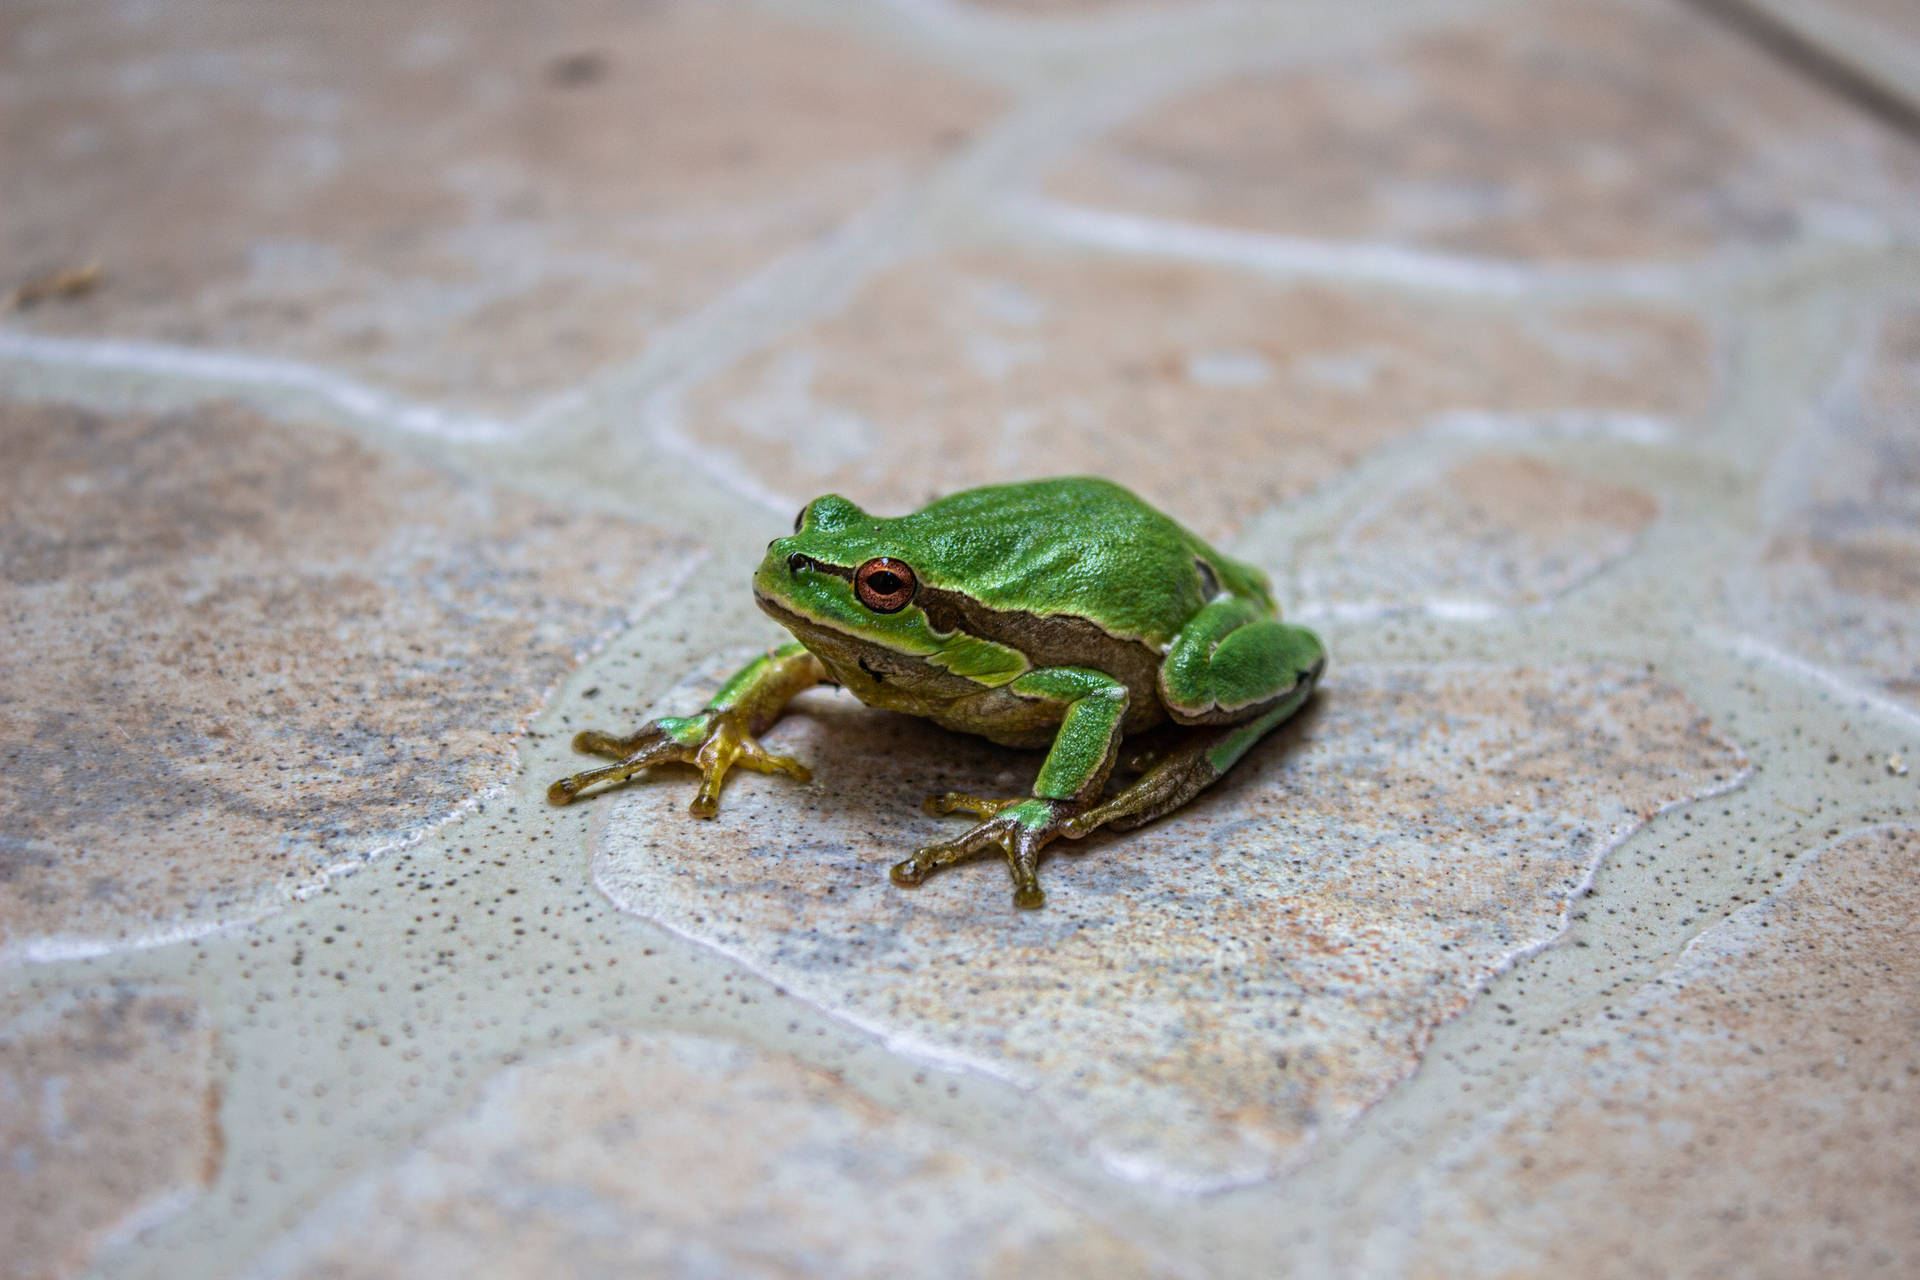 Frog 5184X3456 Wallpaper and Background Image